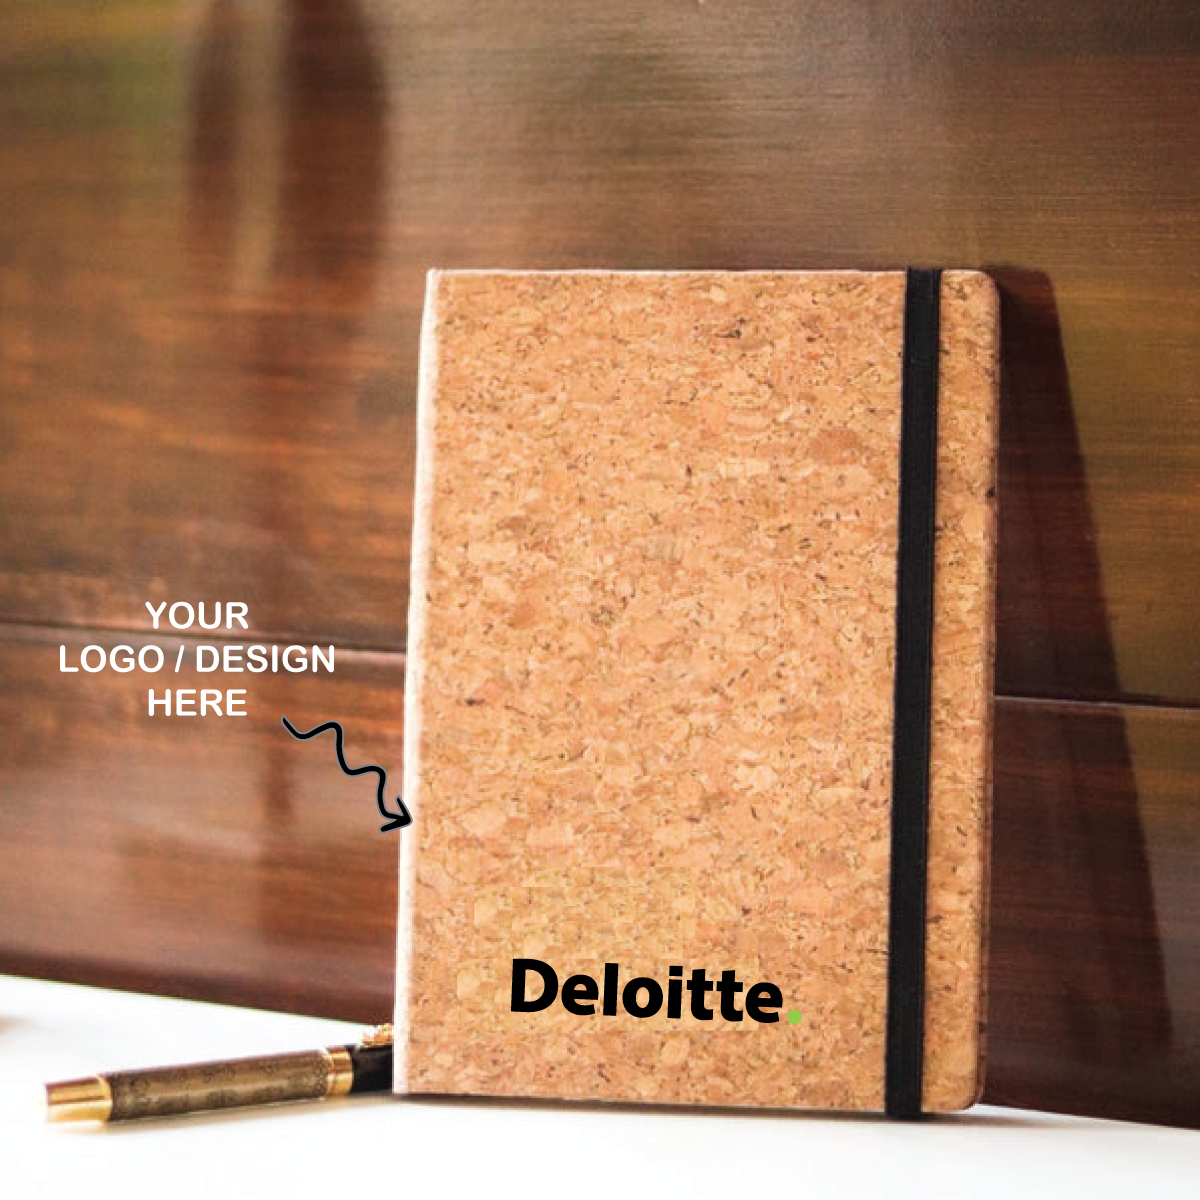 Personalized Eco-Friendly Cork A5 Size Corporate Notebook Diary - For Office Use, Personal Use, or Corporate Gifting BGB107